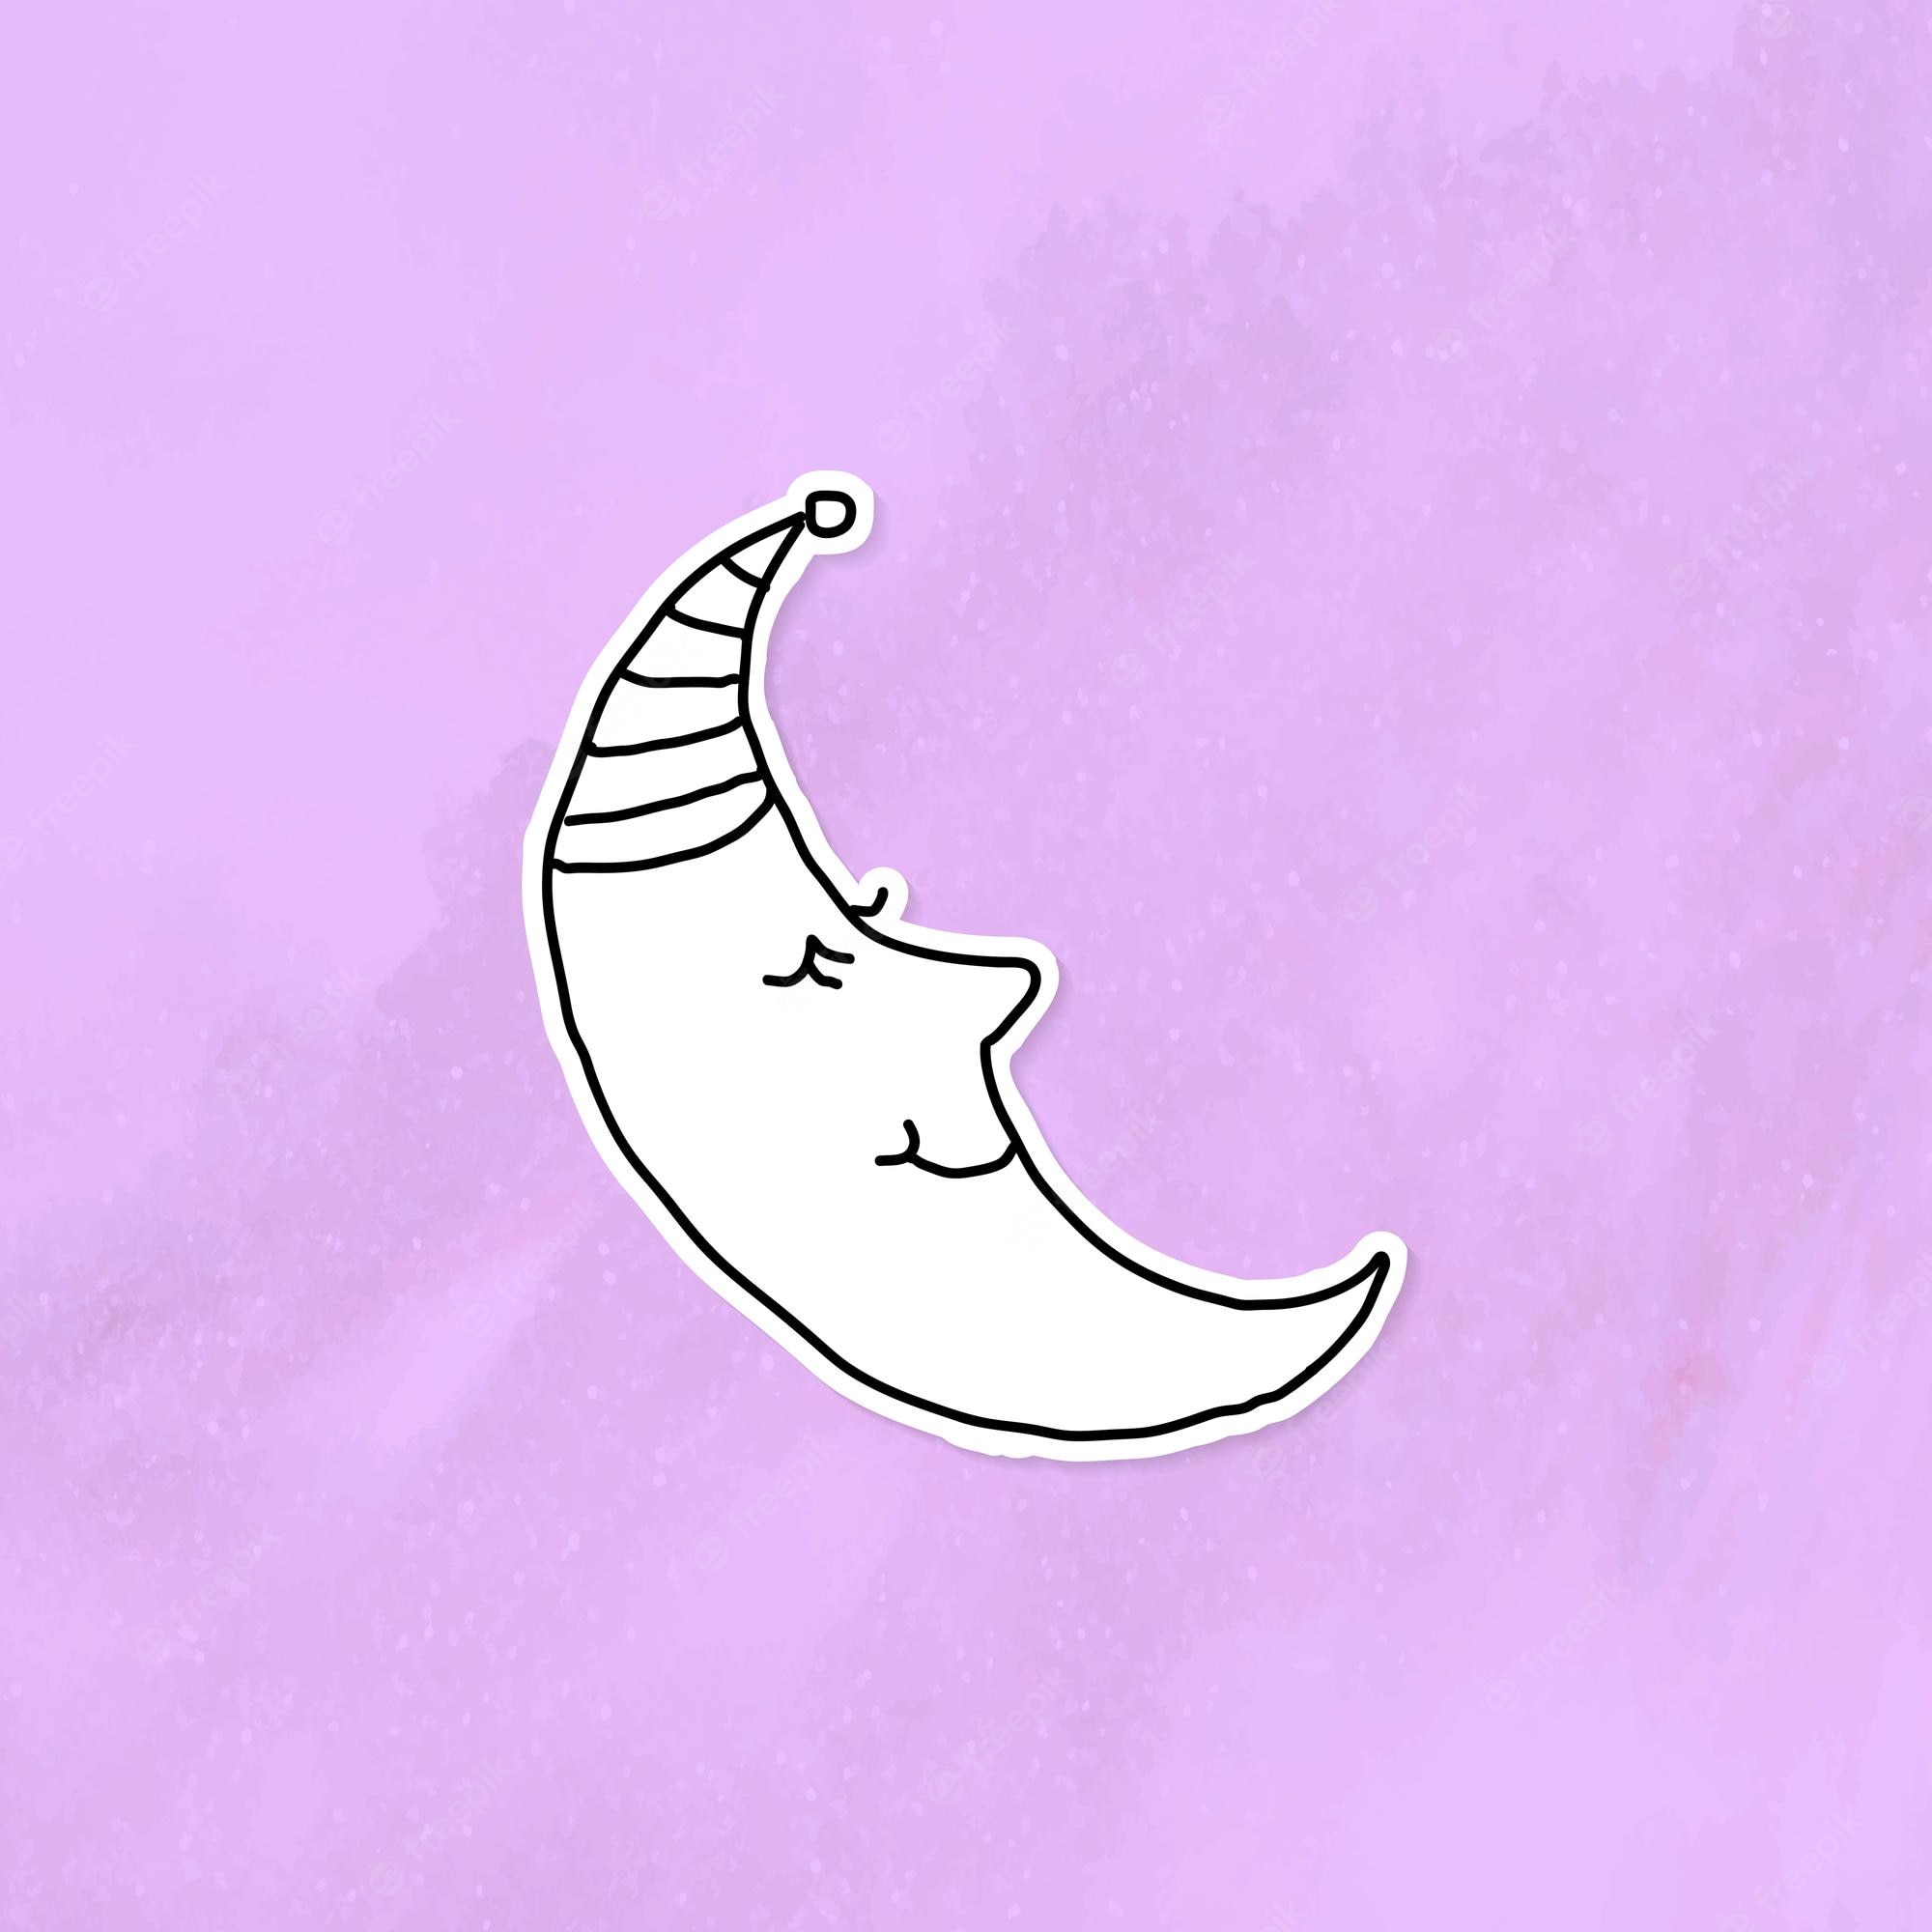 A sticker of a sleeping crescent moon with a hat on. - Doodles